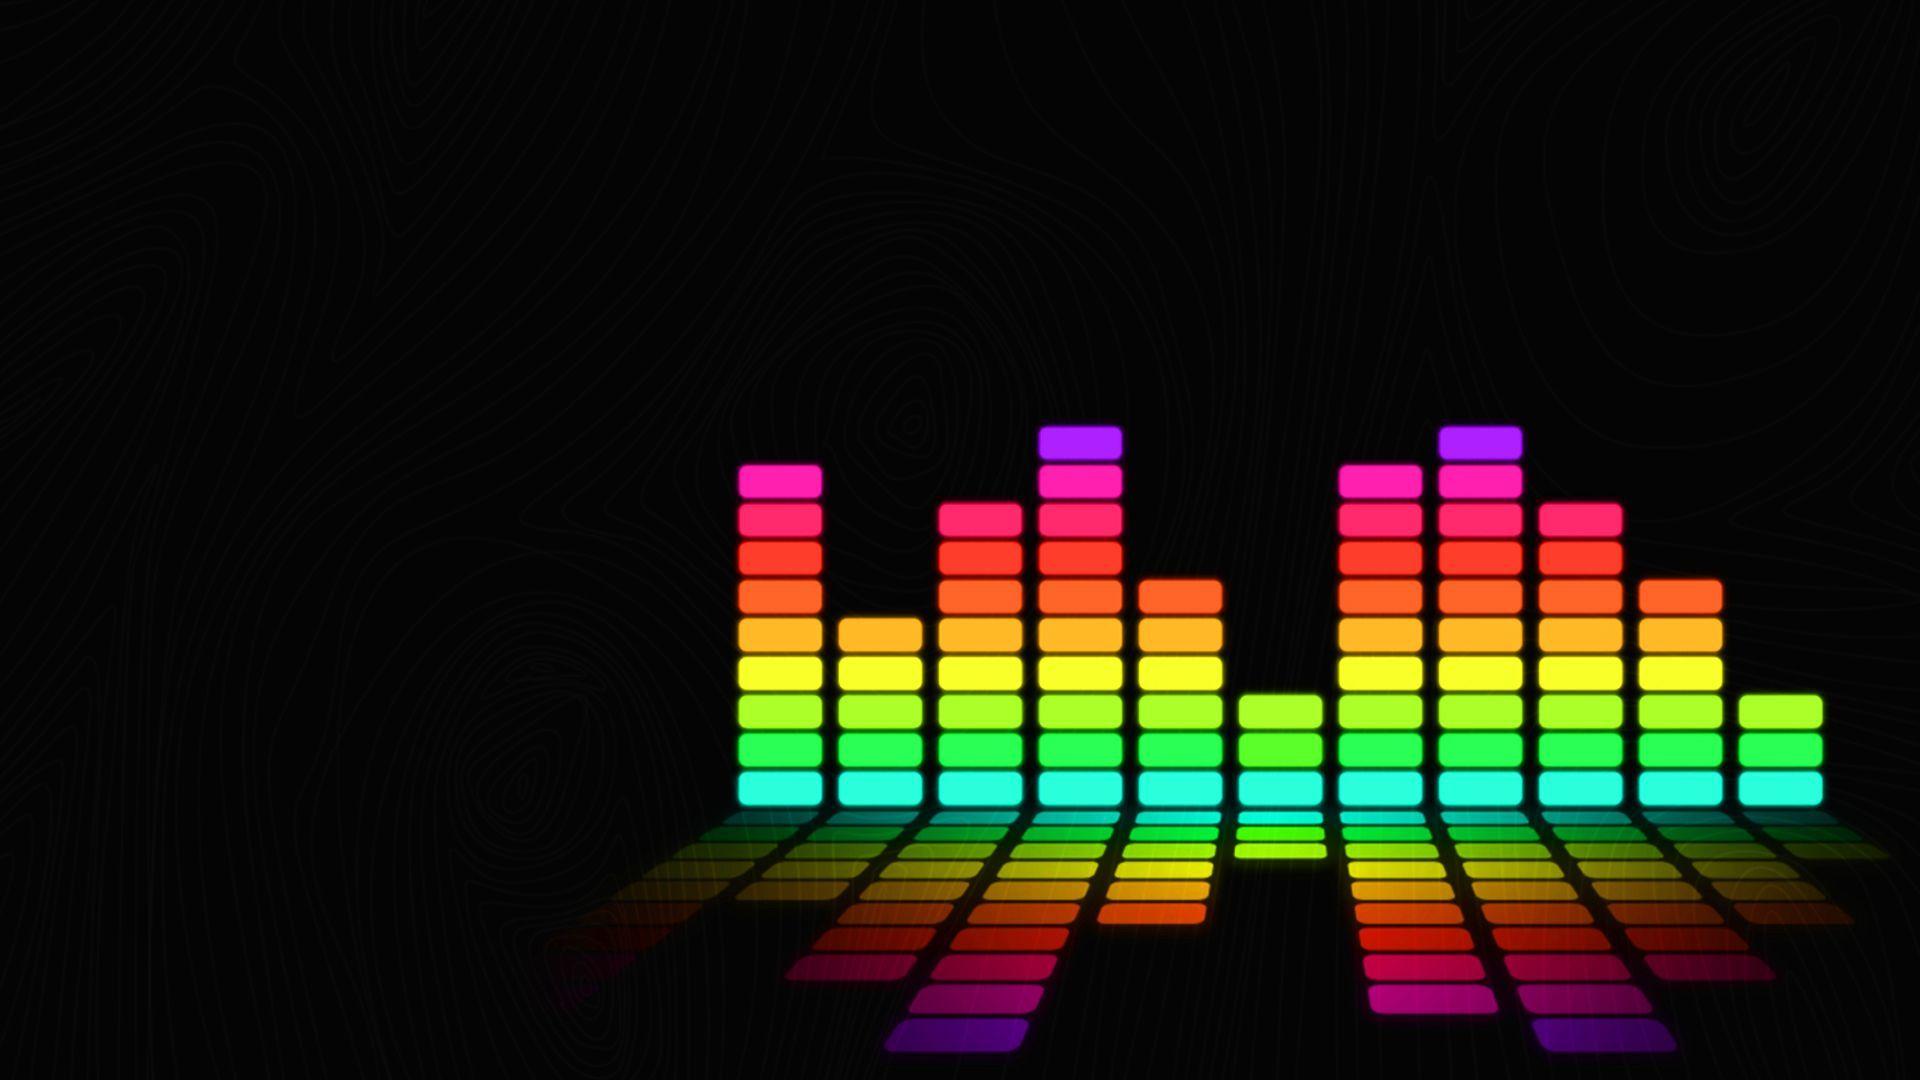 Awesome Music wallpaper Curious, Funny Photo / Picture 1920x1080